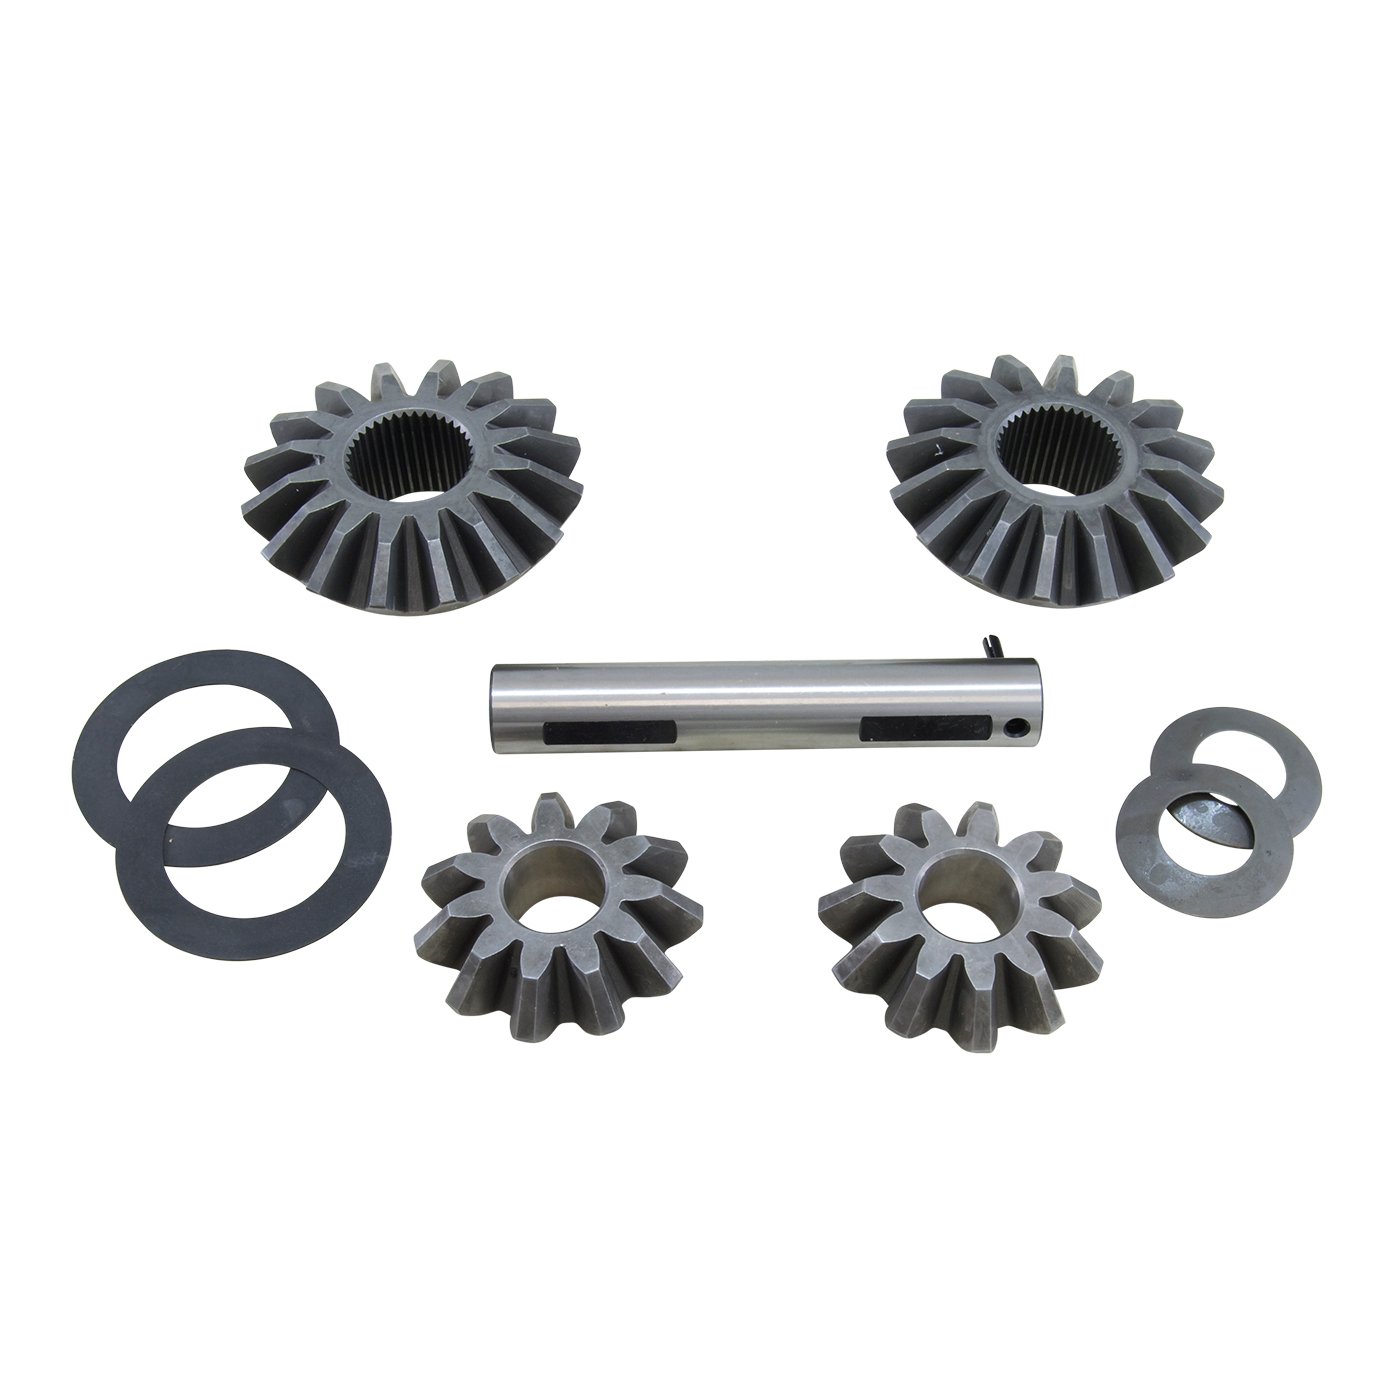 Spider Gear Set for Dana 80 Differential